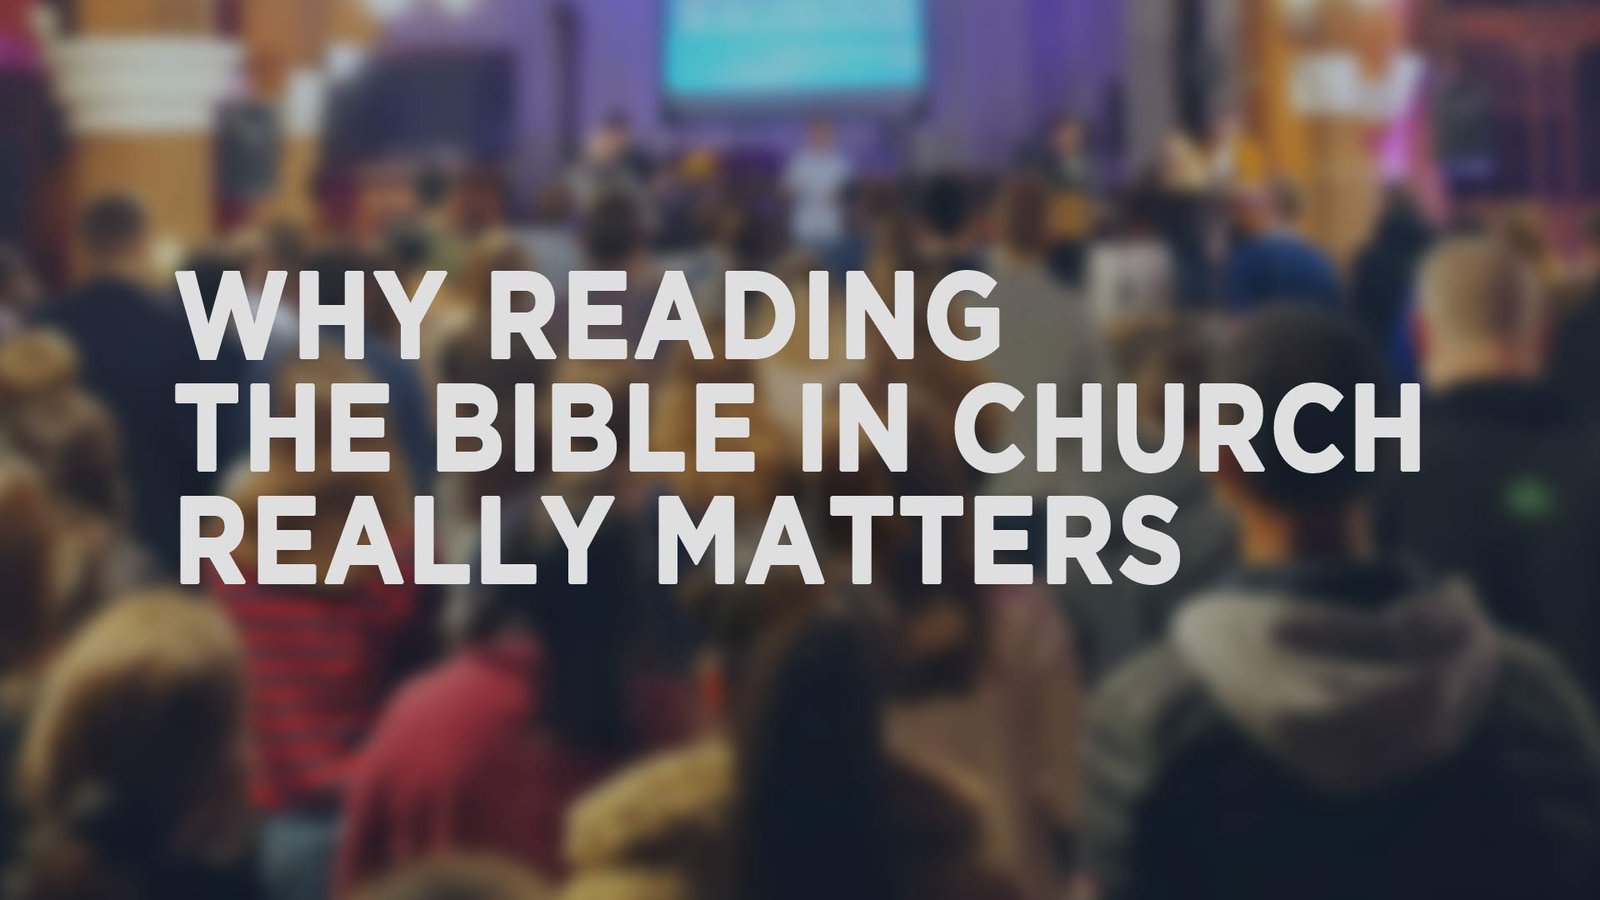 Why Reading the Bible in Church Really Matters